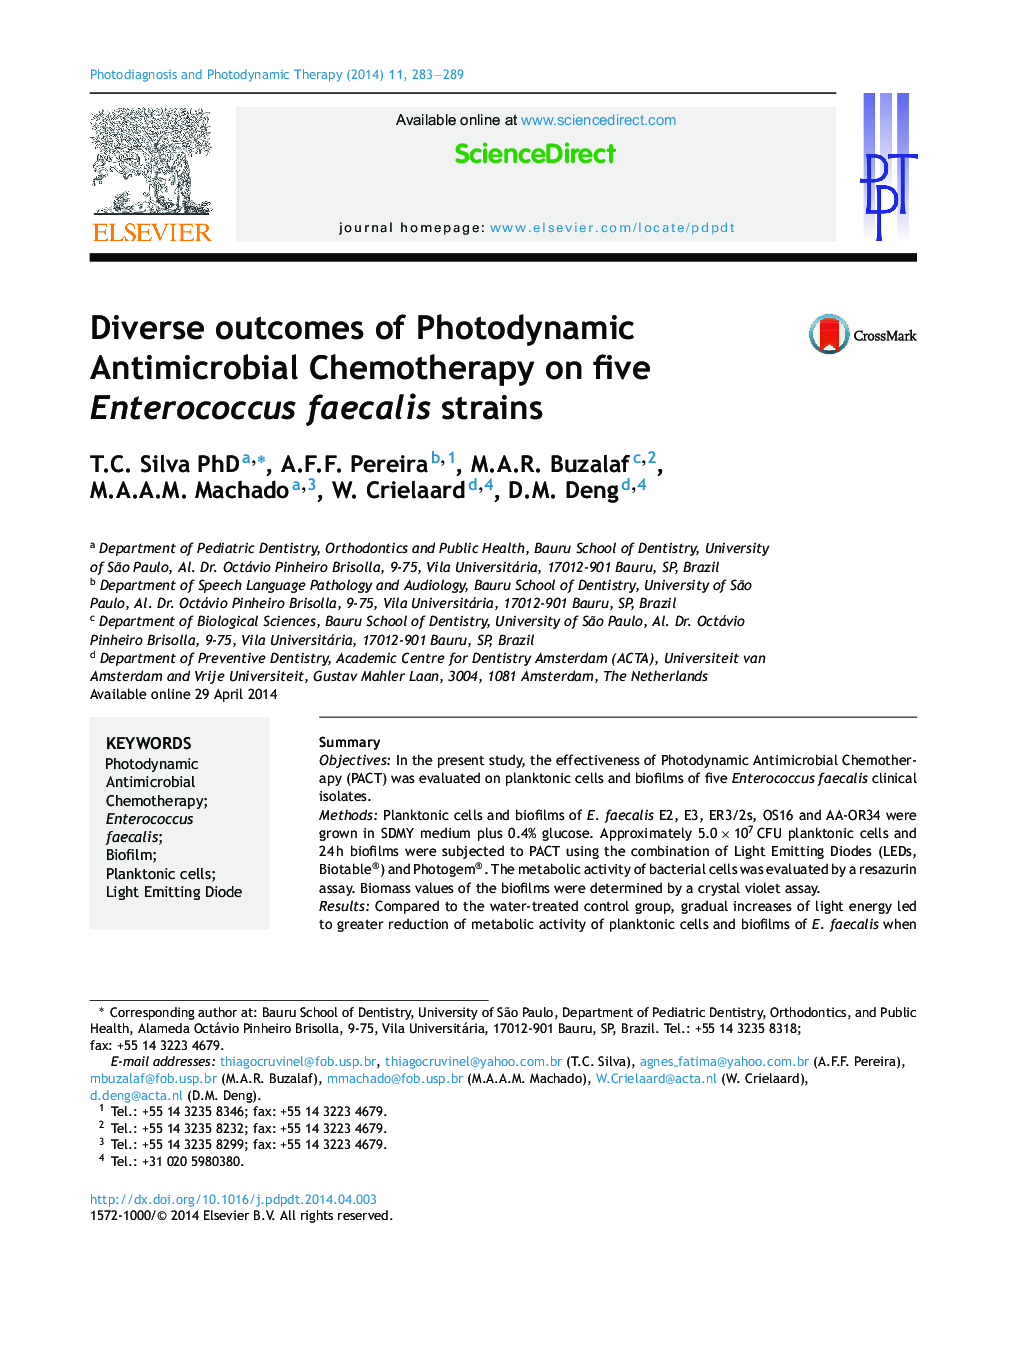 Diverse outcomes of Photodynamic Antimicrobial Chemotherapy on five Enterococcus faecalis strains